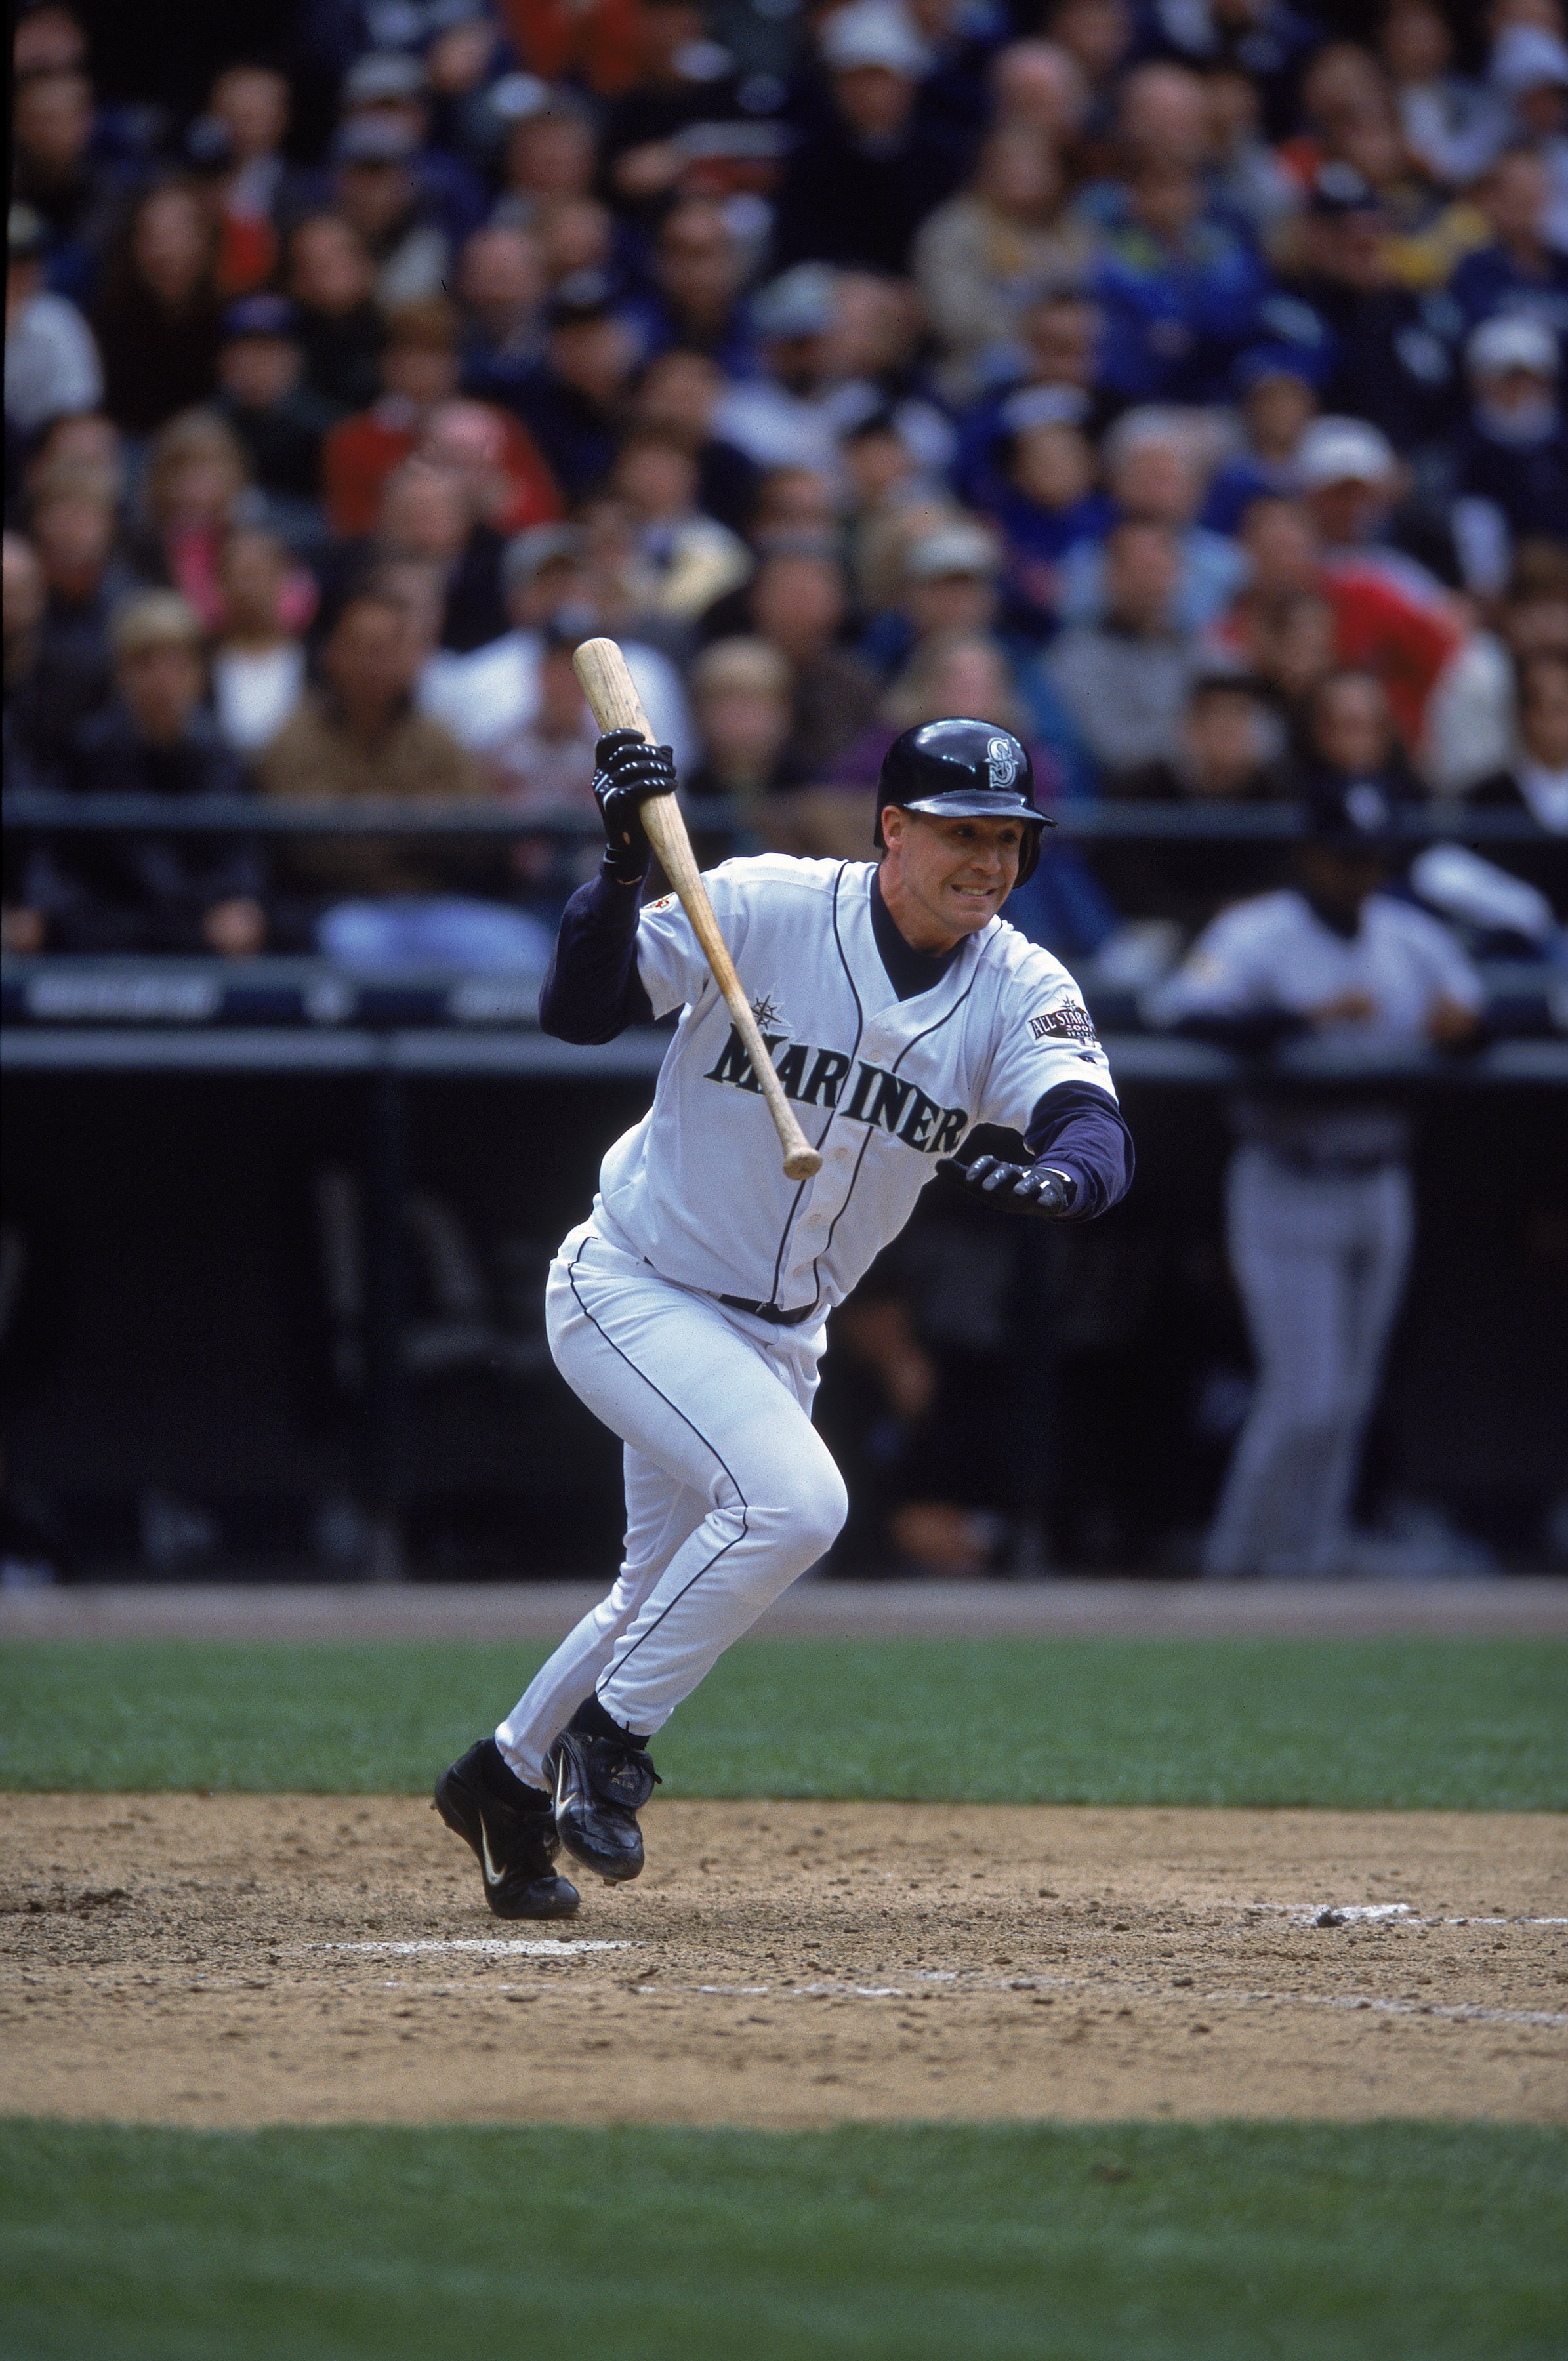 Top 40 greatest players in Seattle Mariners history: The top 10